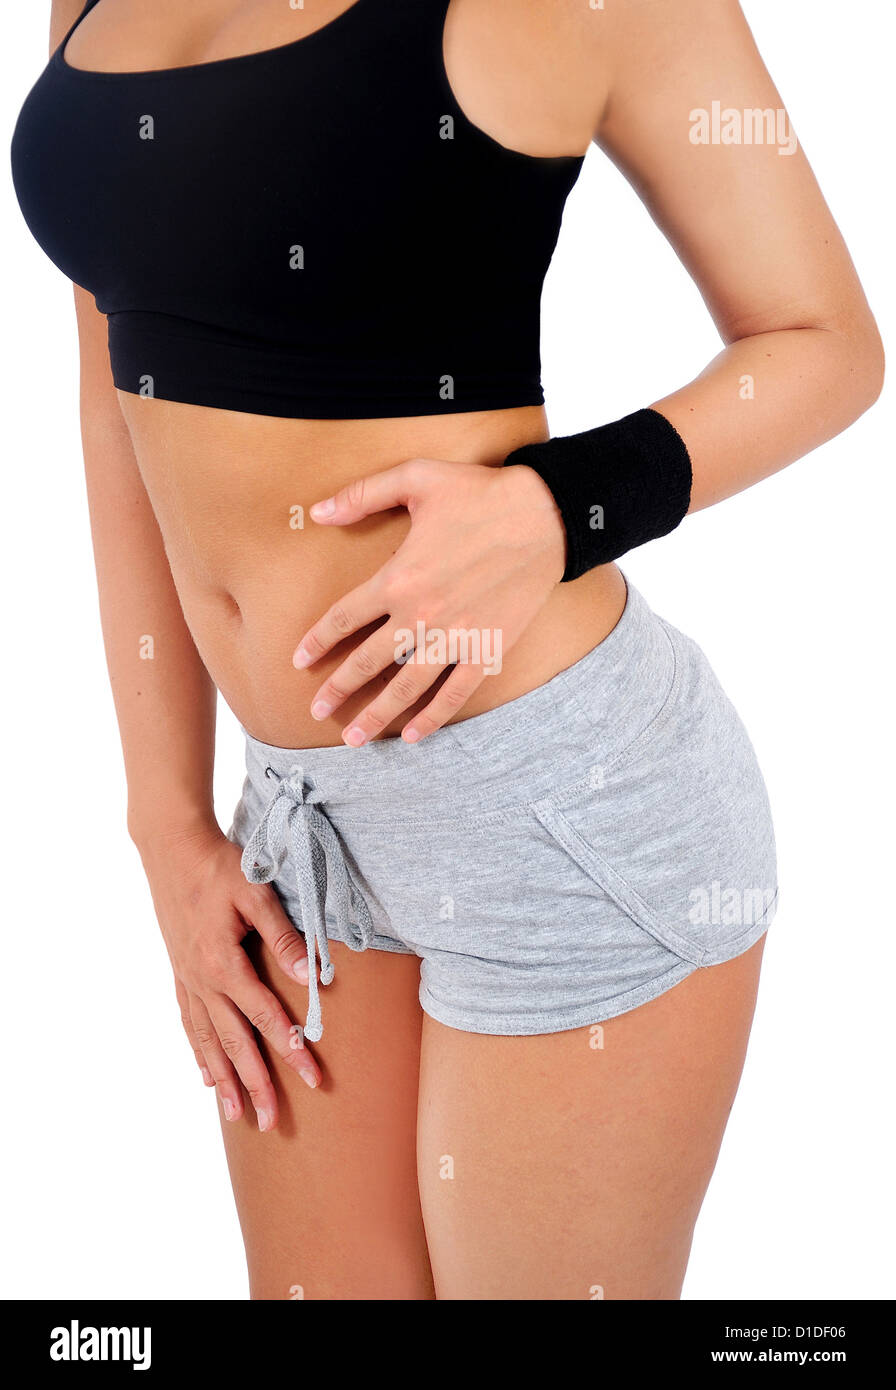 Isolated young fitness woman abdominal massage Stock Photo